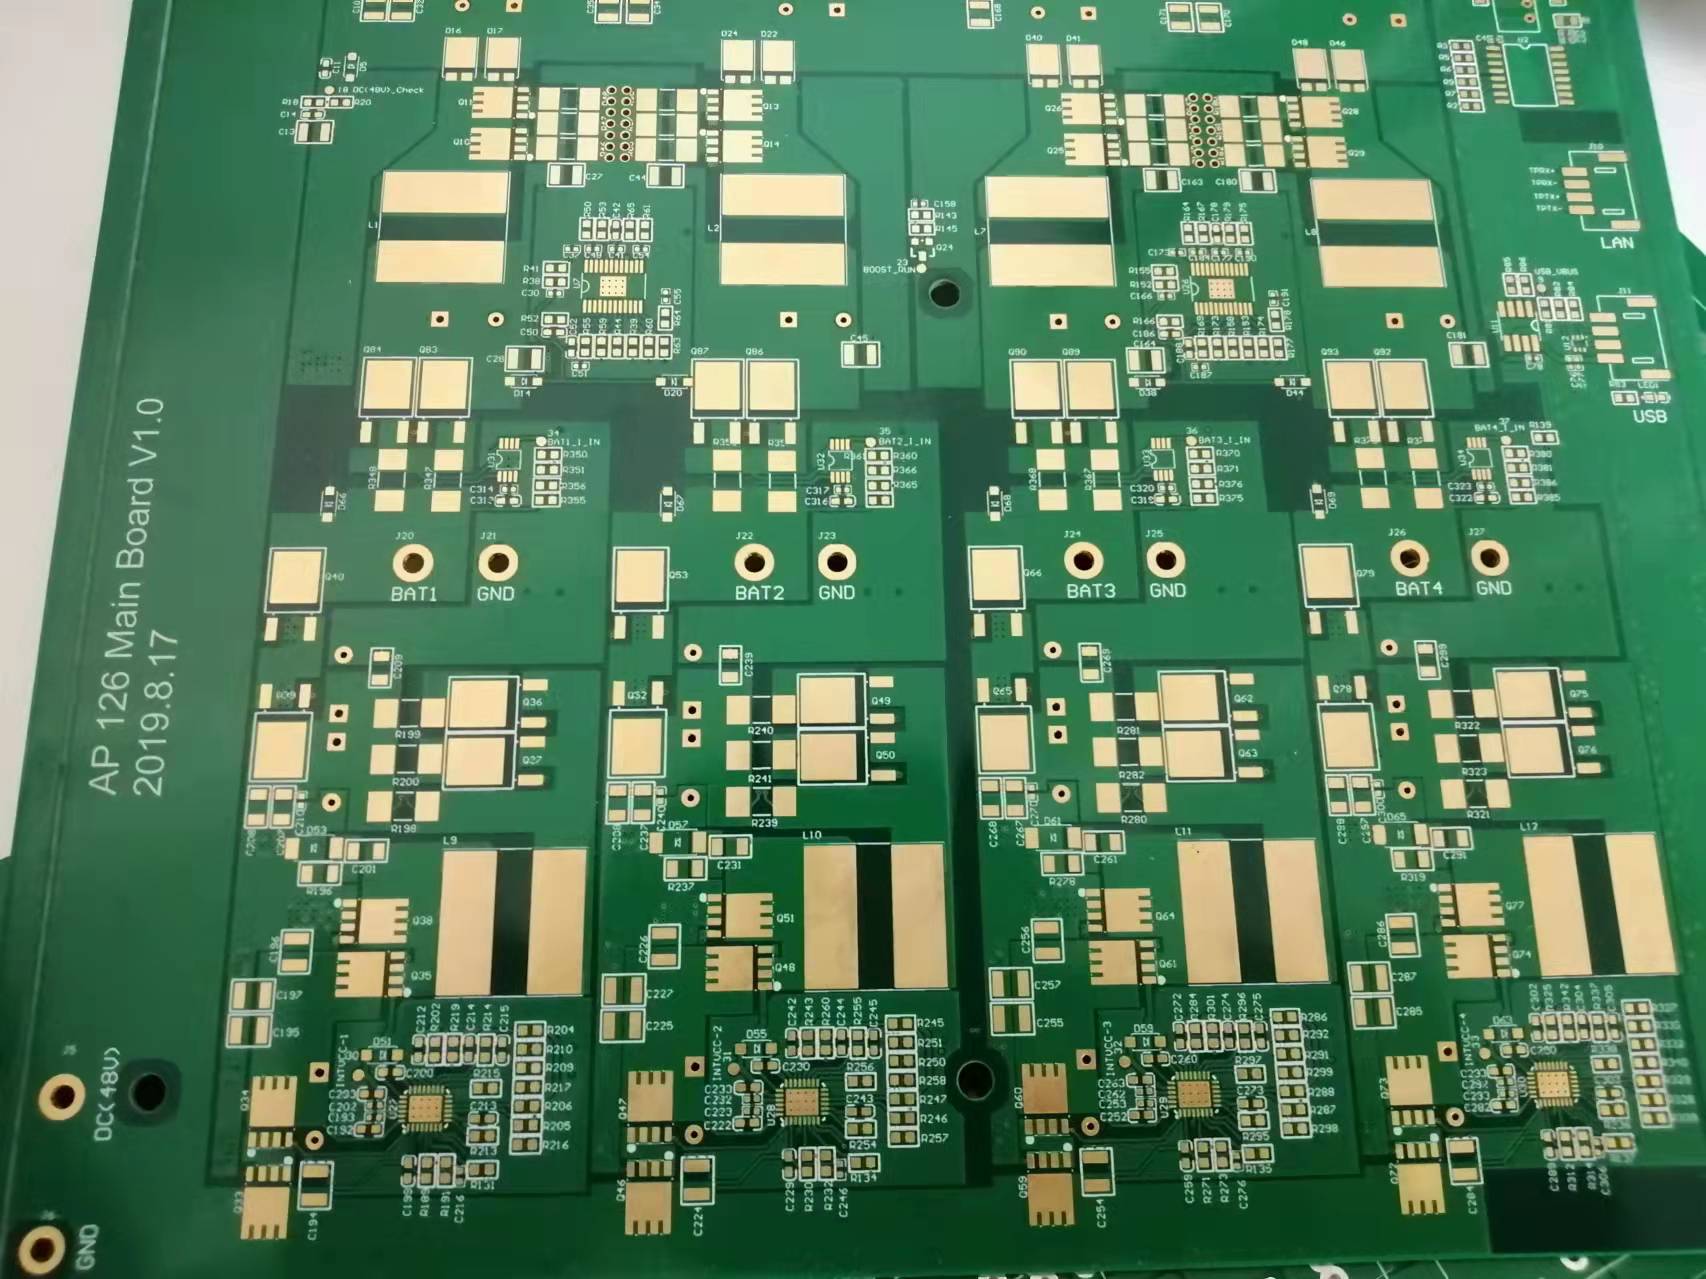 Immersion gold PCB